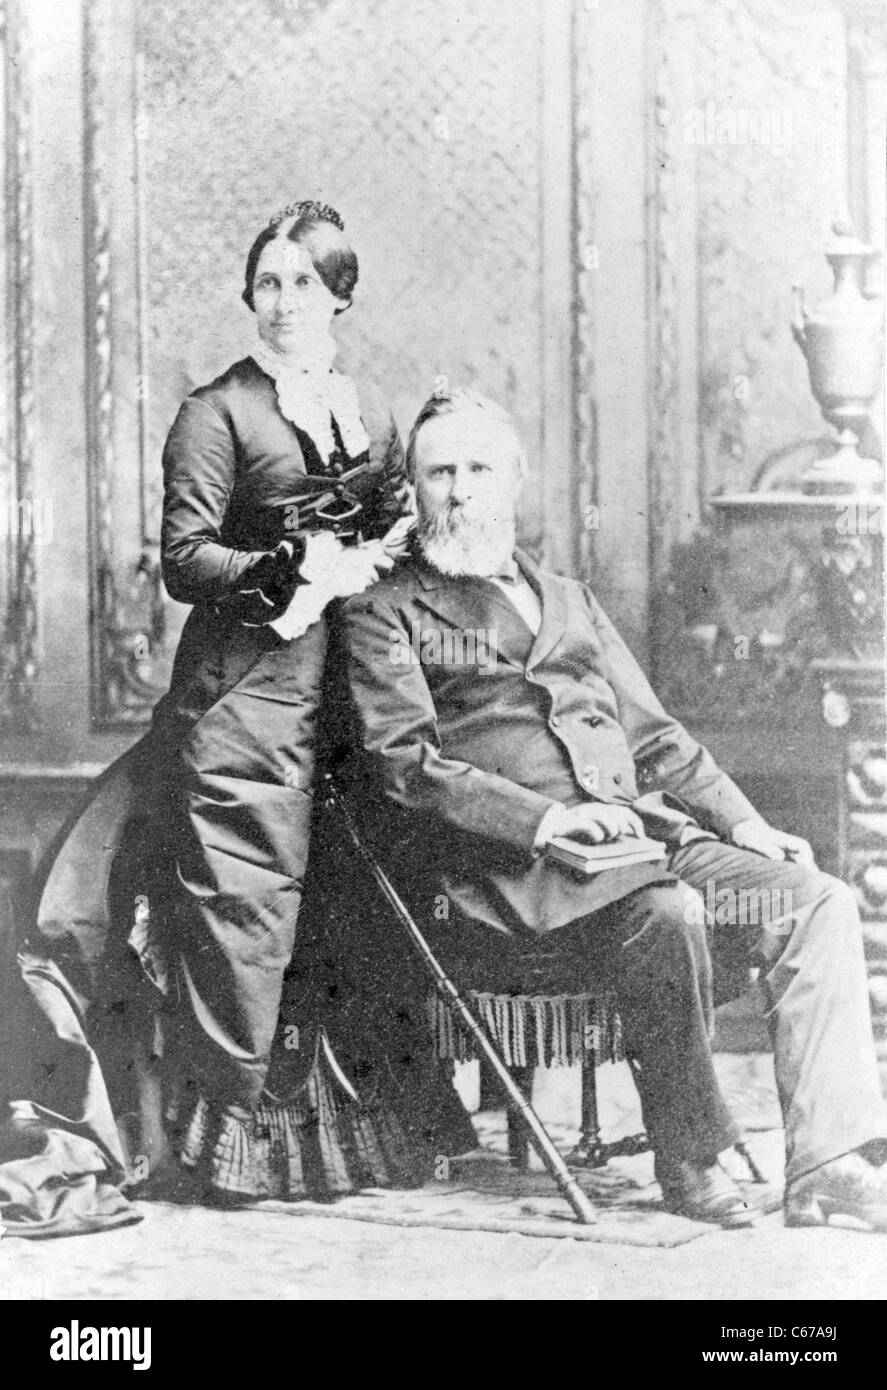 Rutherford, Präsident und Frau Rutherford B. Hayes, Lucy Webb Hayes, um 1870-1880 Stockfoto